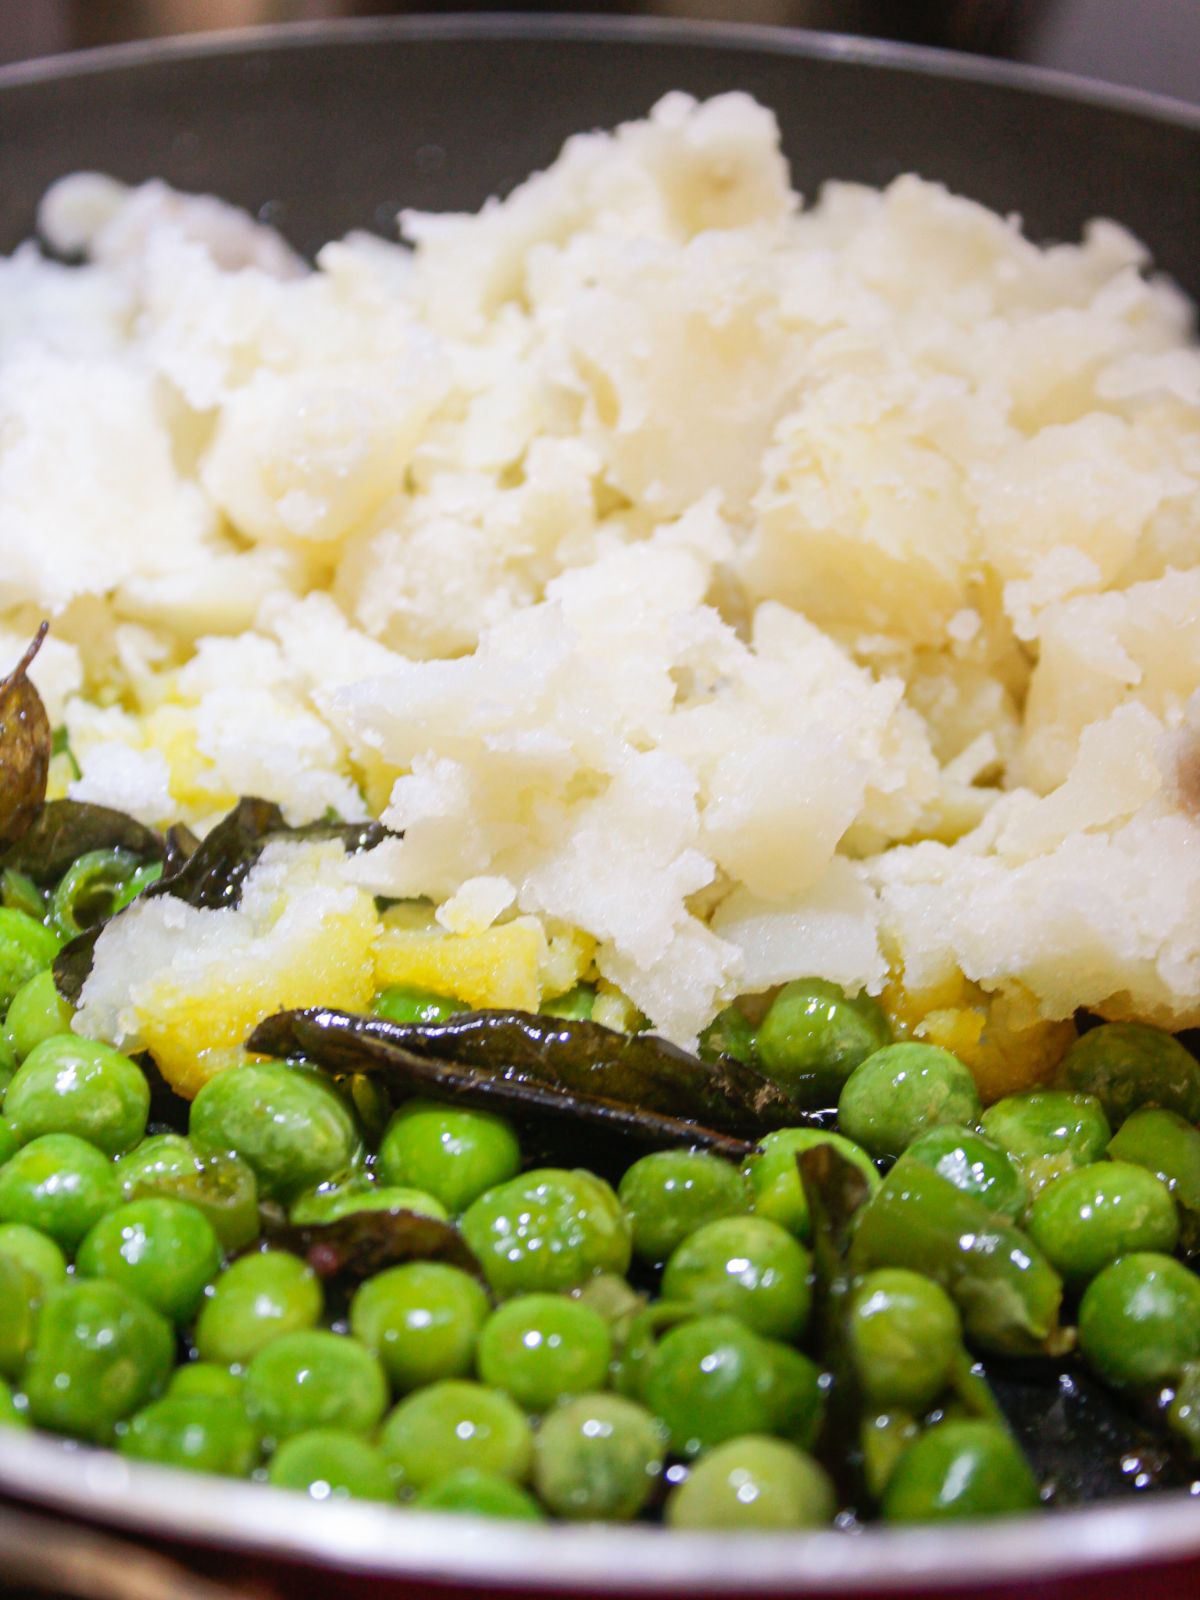 mashed potatoes and peas in skillet